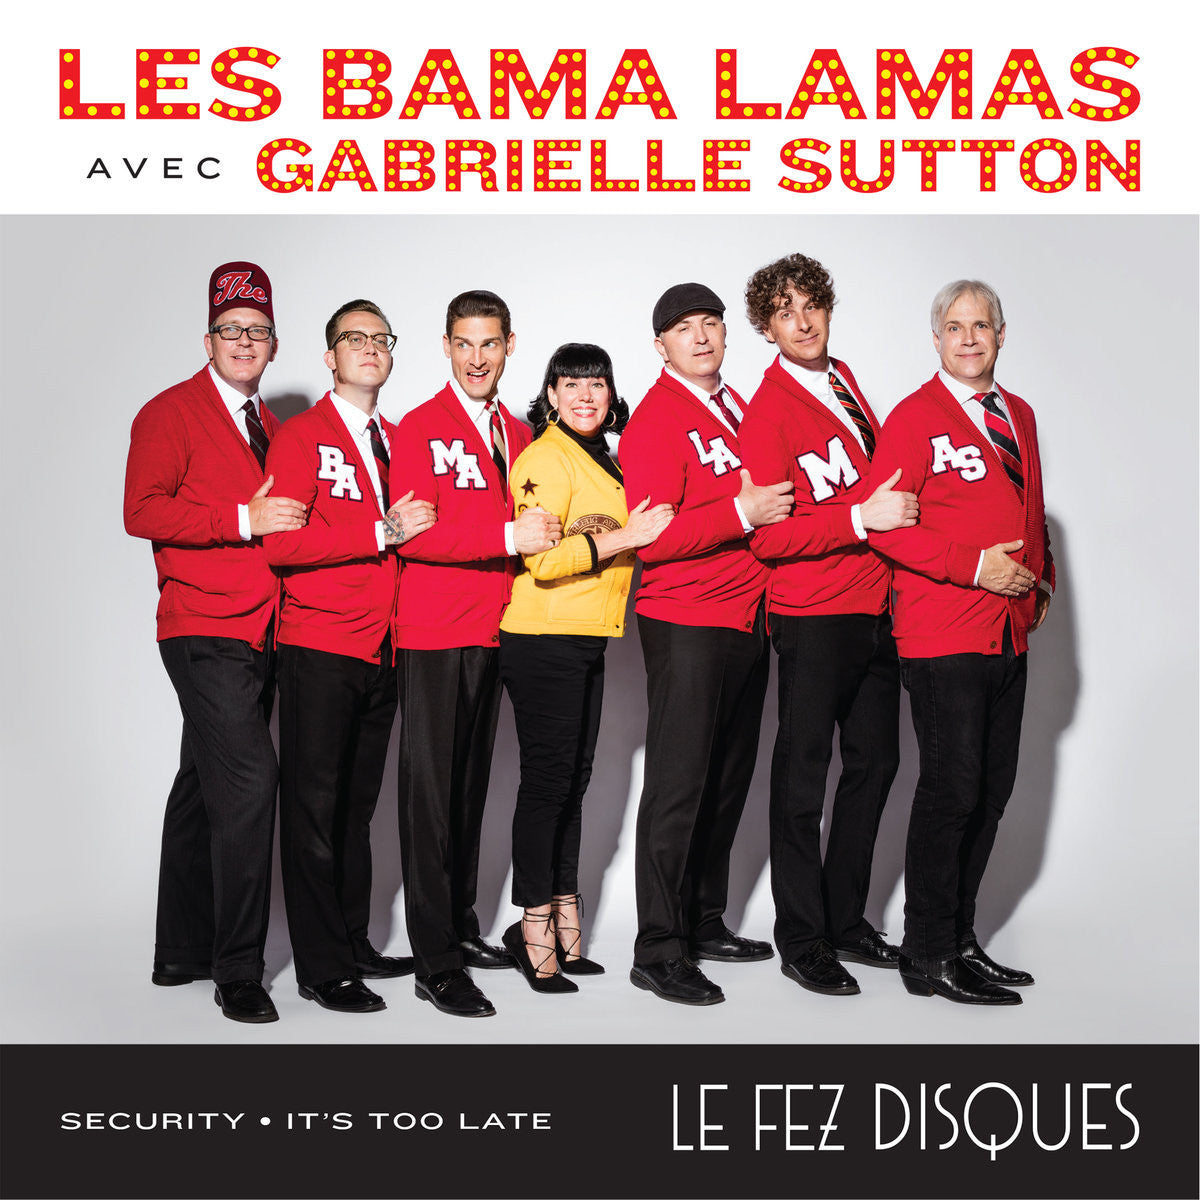 The Bama Lamas (feat. Gabrielle Sutton) - Security / It's Too Late - New Vinyl 2017 Limited Edition (500 Copies!) - Chicago, IL Rock & Roll / R&B